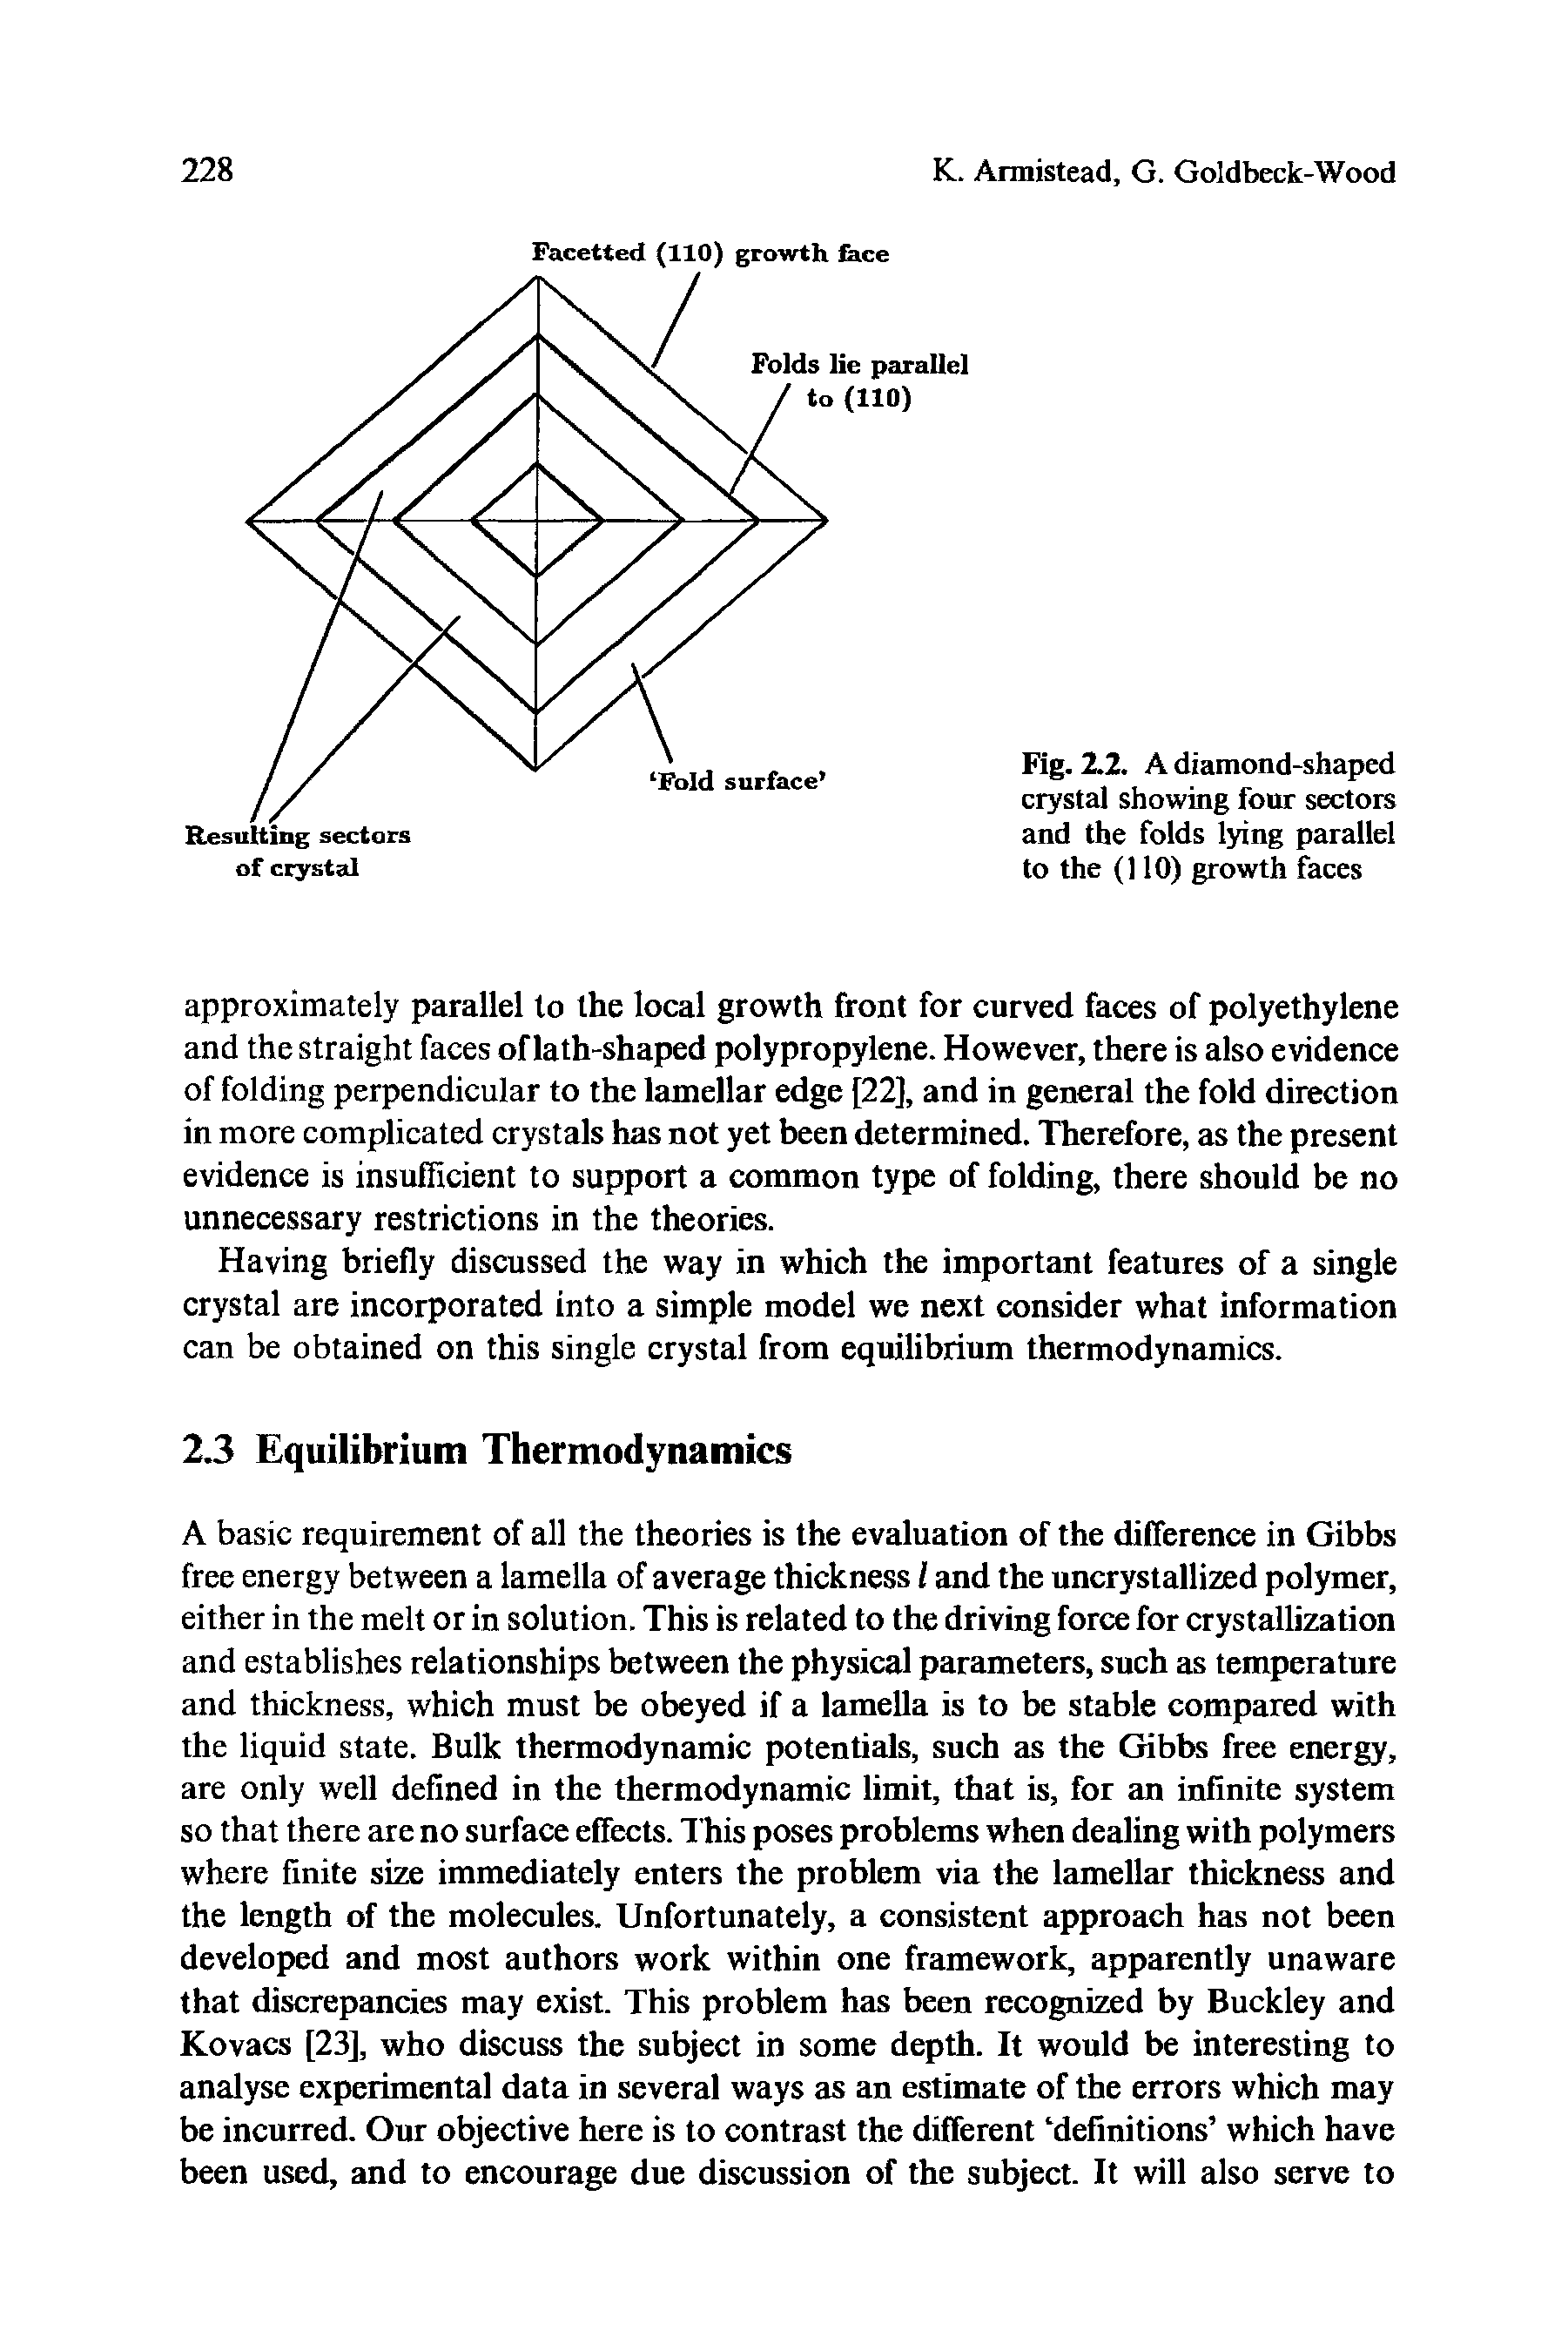 Fig. 2.2. A diamond-shaped crystal showing four sectors and the folds lying parallel to the (110) growth faces...